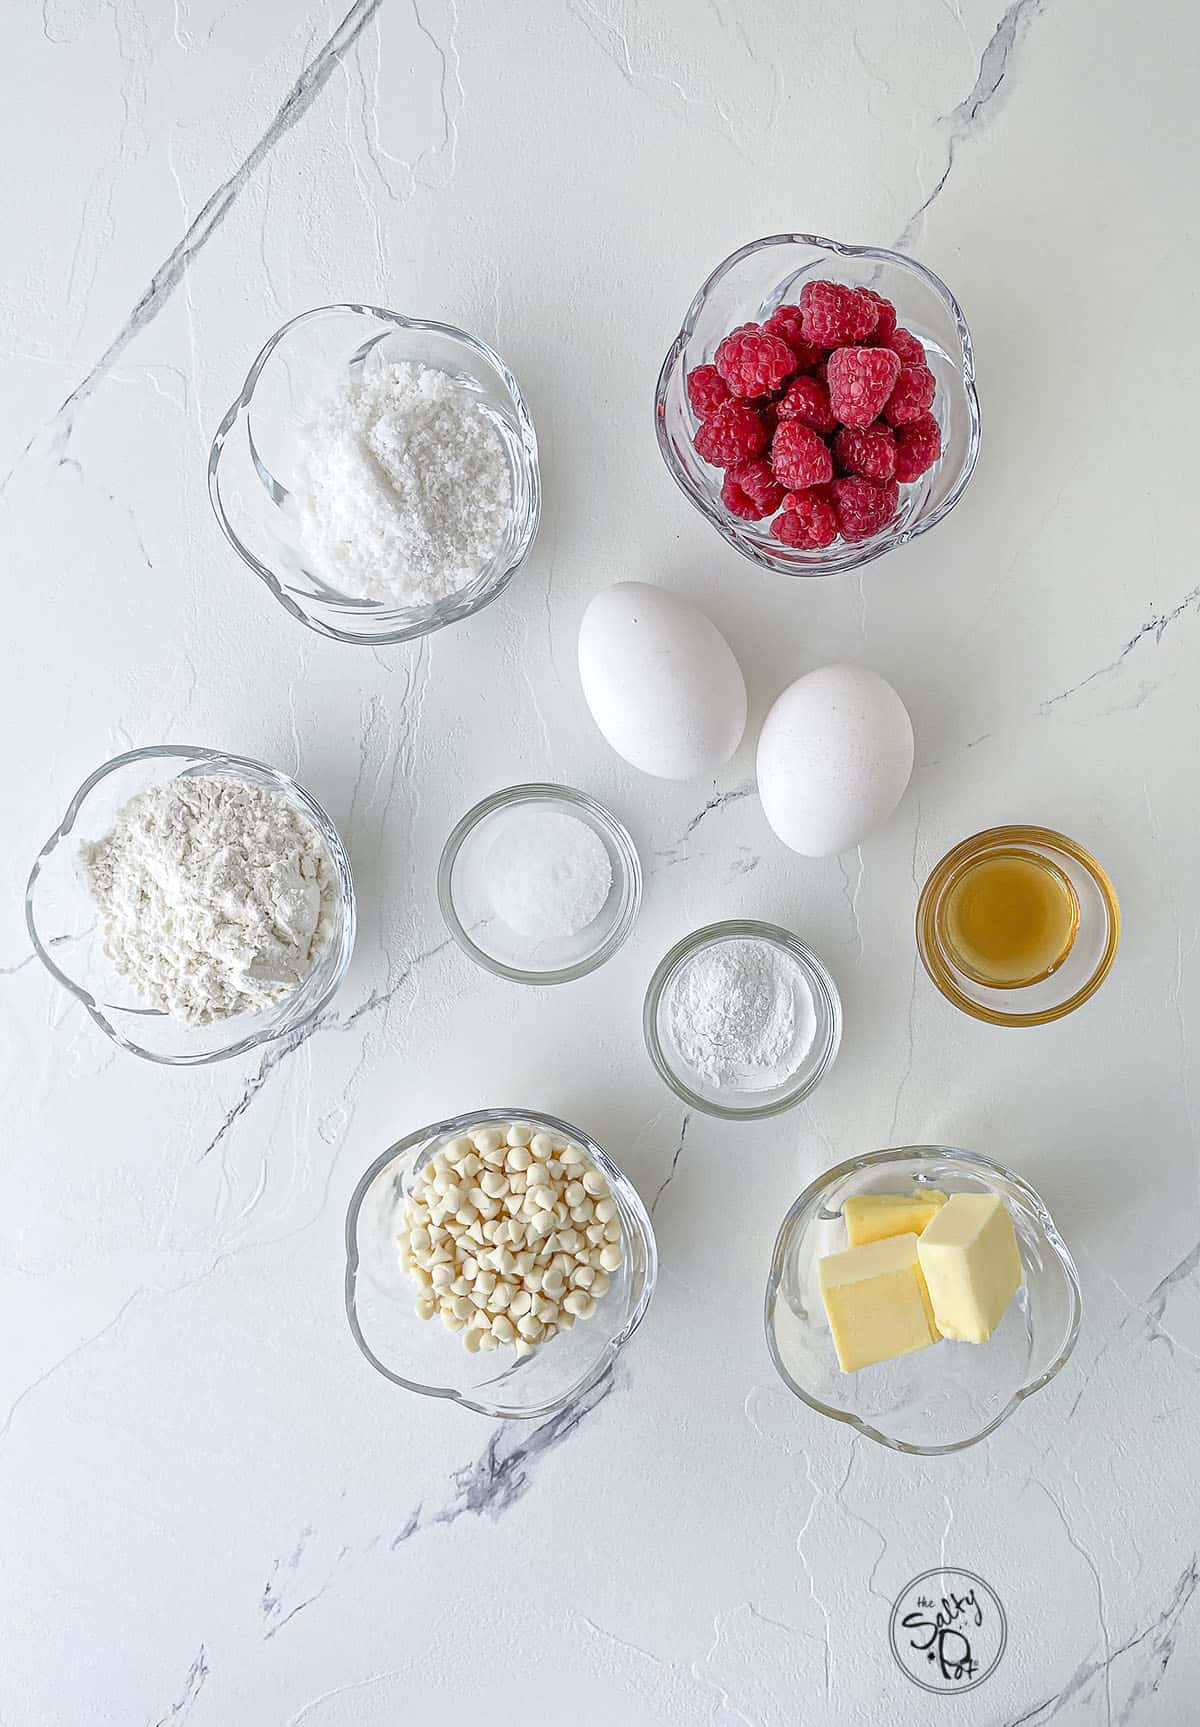 A photo of the ingredients needed for the recipe. Flour, eggs, butter, salt, baking powder, raspberries, vanilla, etc.